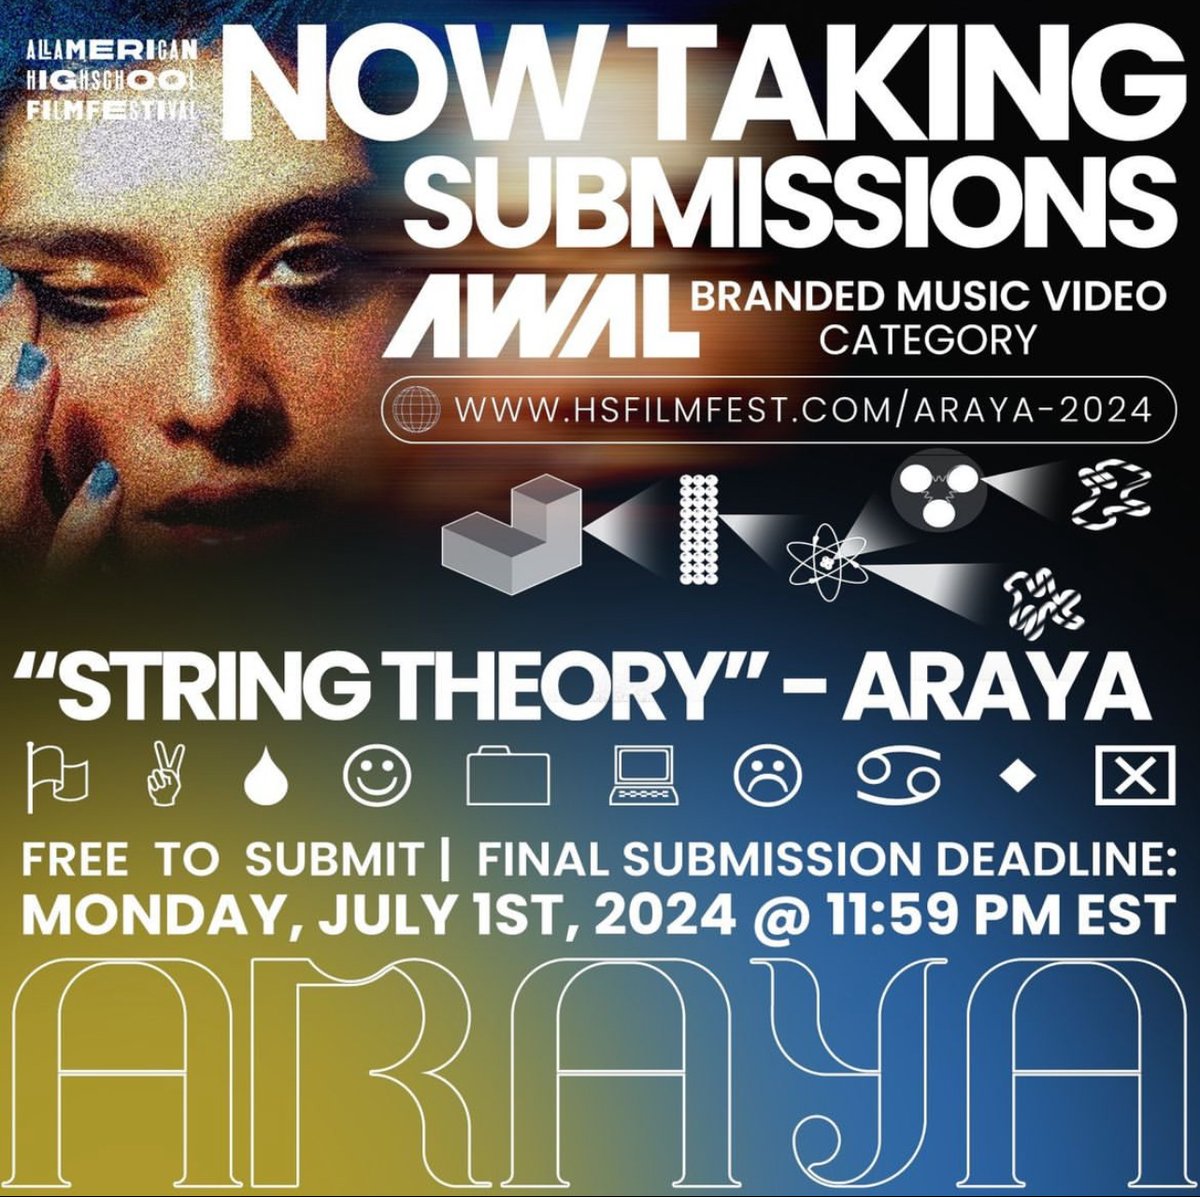 Craft your own music video for @arayaworld's 'String Theory' in the #AAHSFF2024⁠ Branded Music Video Category presented by @awal! This is a major opportunity to create a music video for an artist signed to a record label!⁠ Submit today: https:// hsfilmfest.com/araya-2024